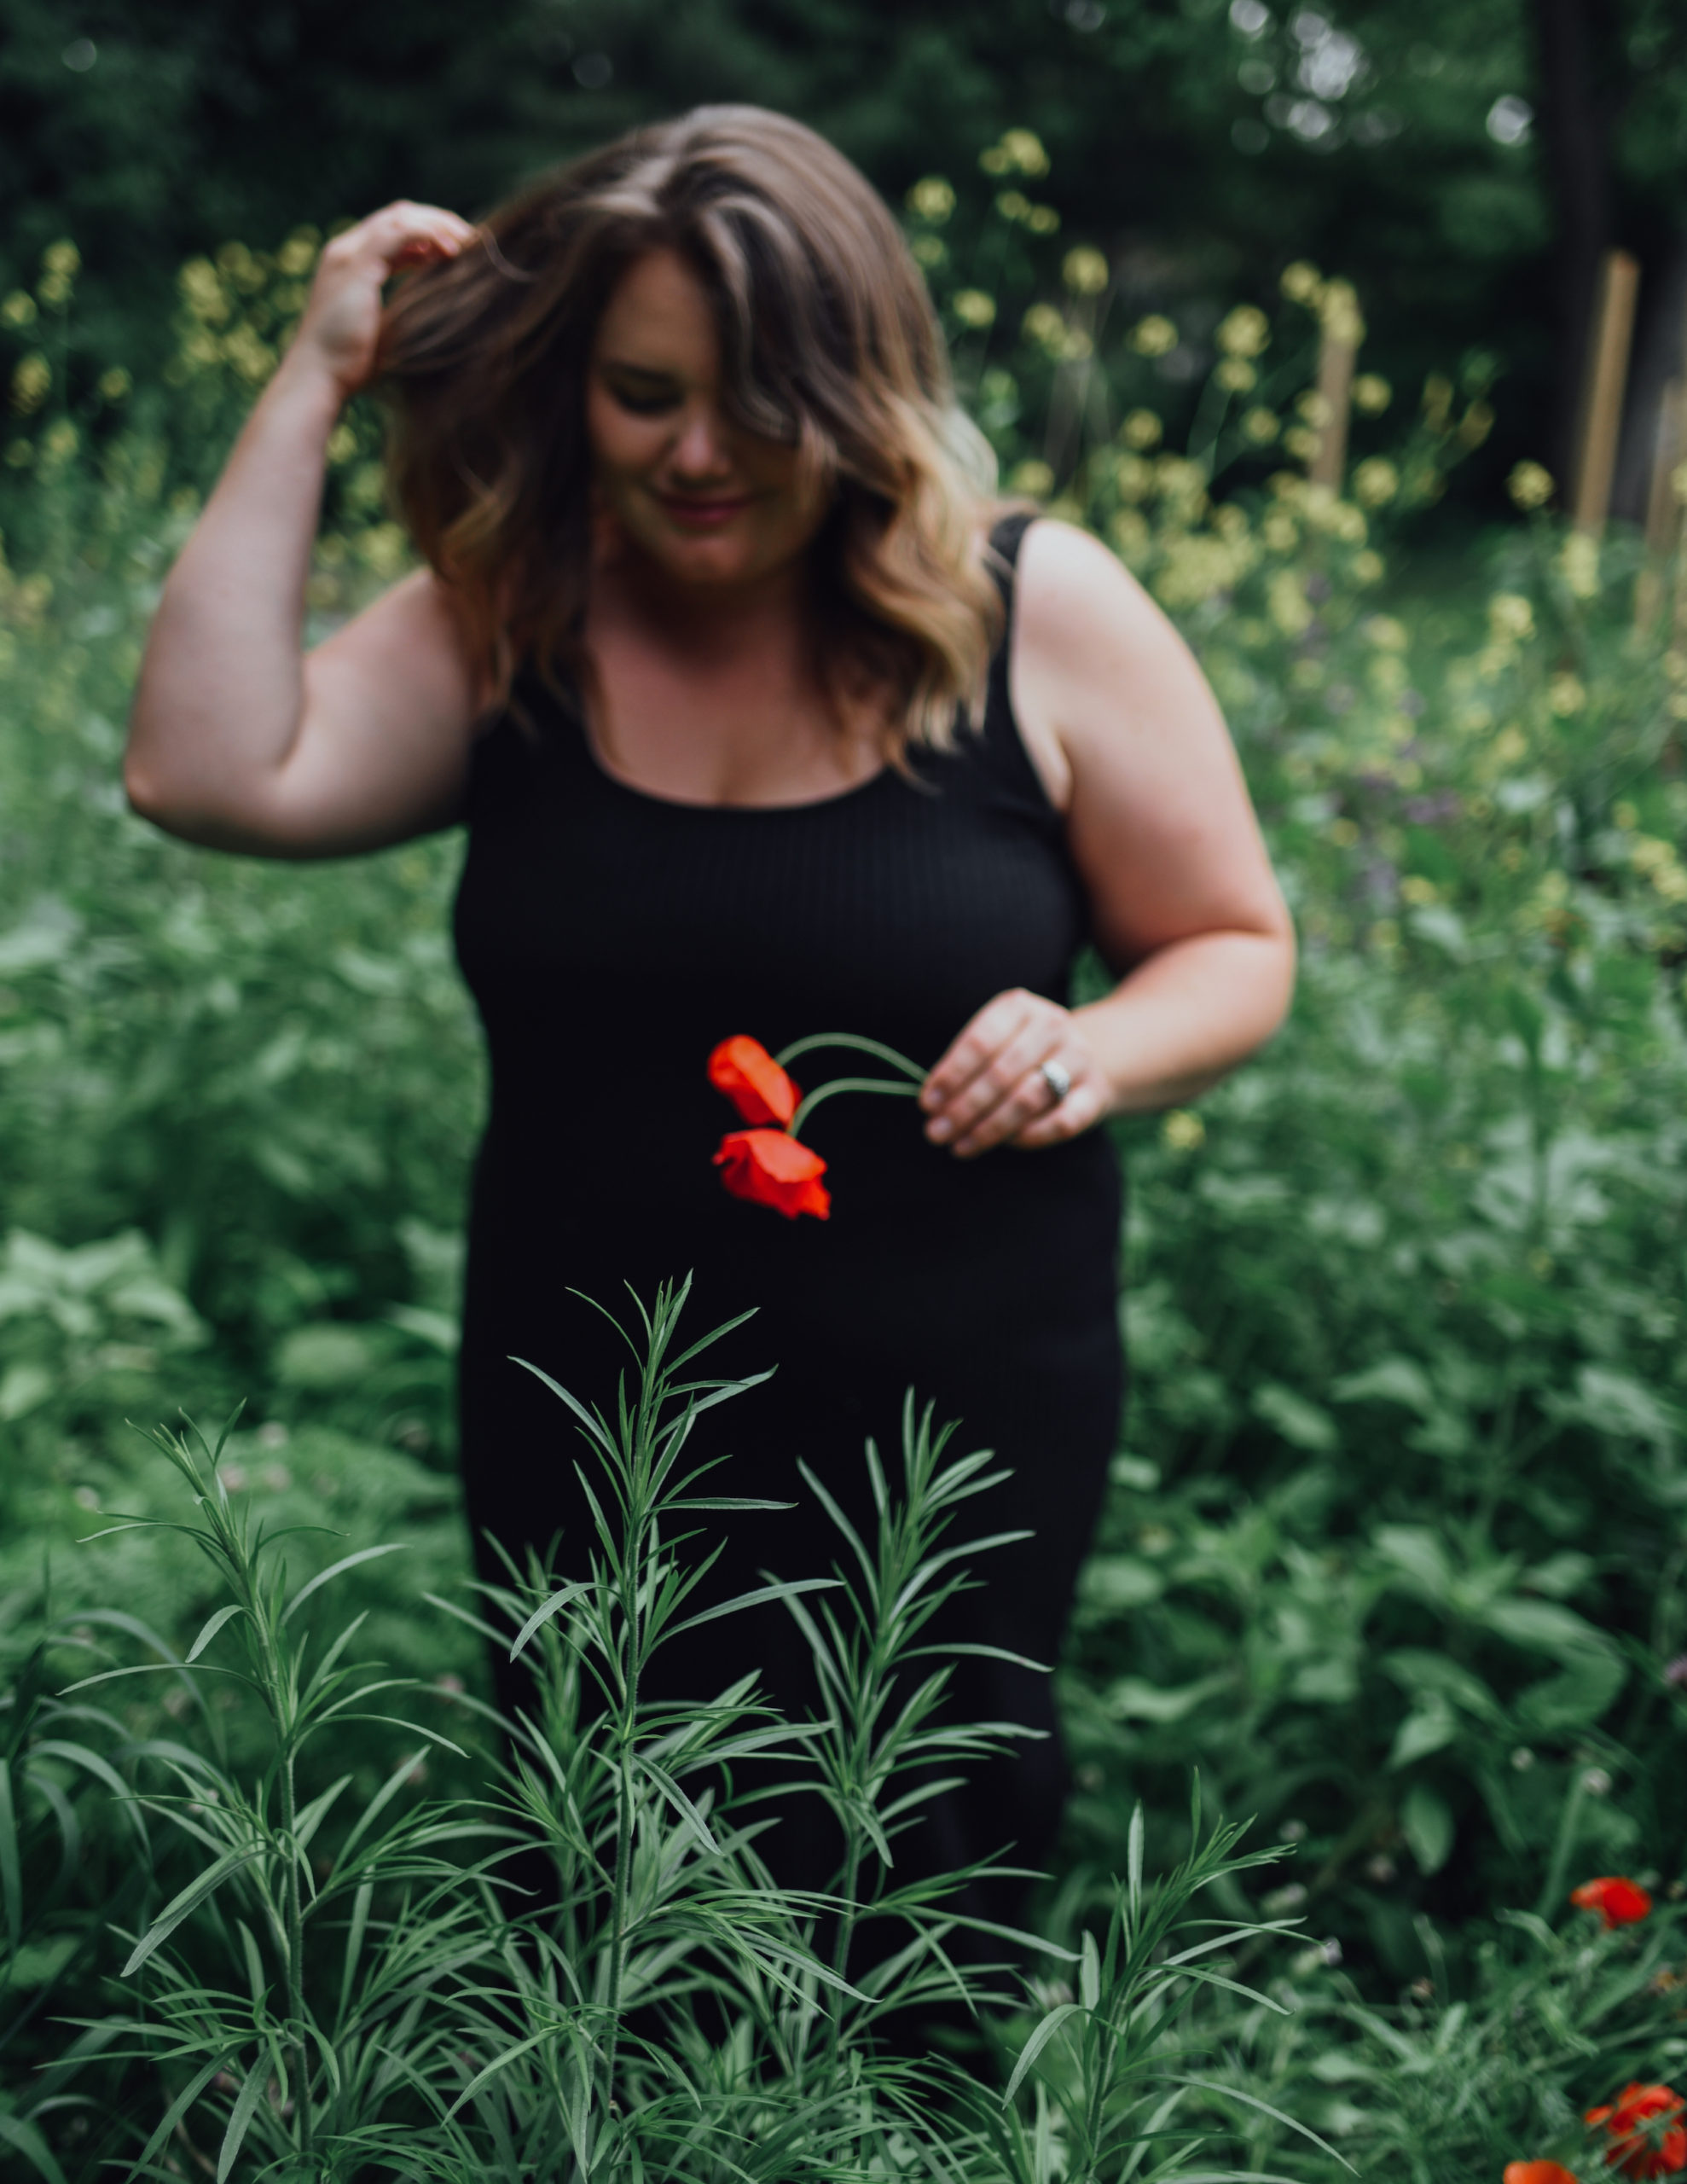 Black Maxi Dress For Summer. Sharing some fabulous black maxi dress options for summer dressing! A black maxi is a simple and chic outfit maker! 